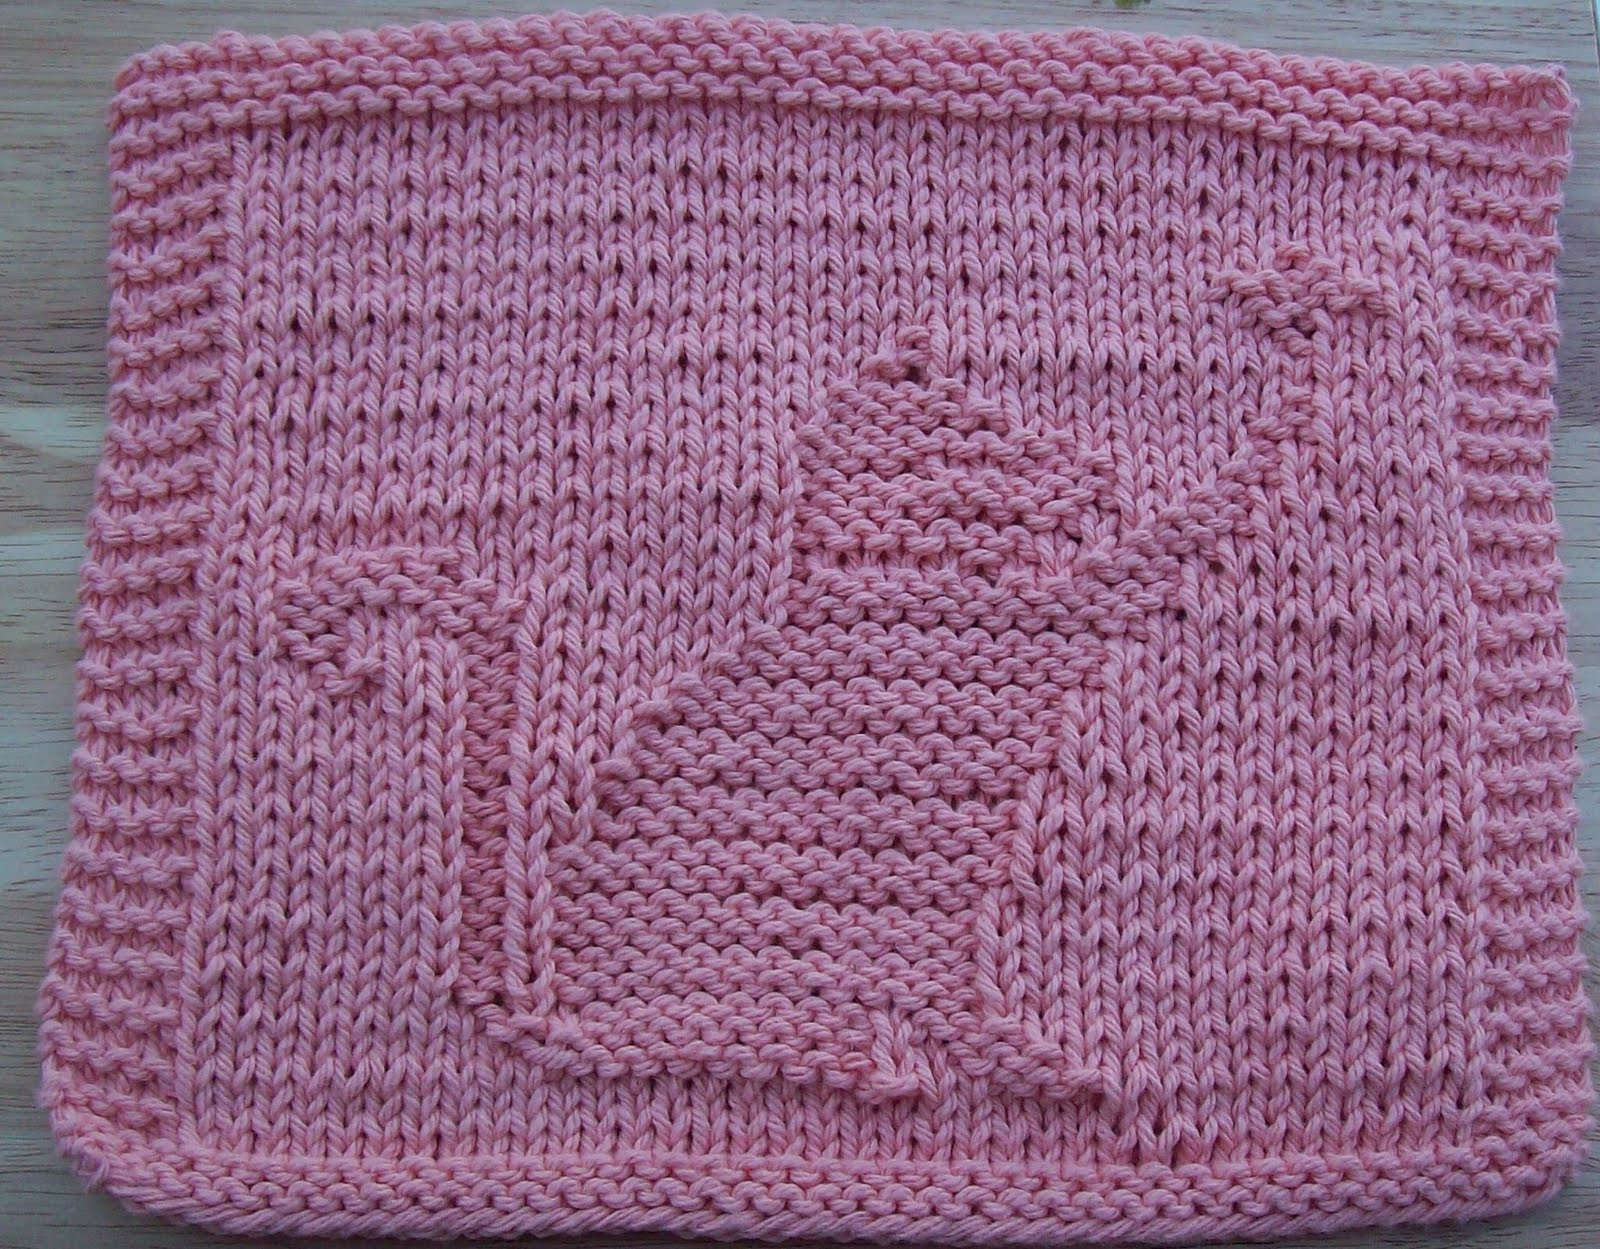 Knitted Butterfly Dishcloth Pattern Digknitty Designs Cat With Butterfly Knit Dishcloth Pattern